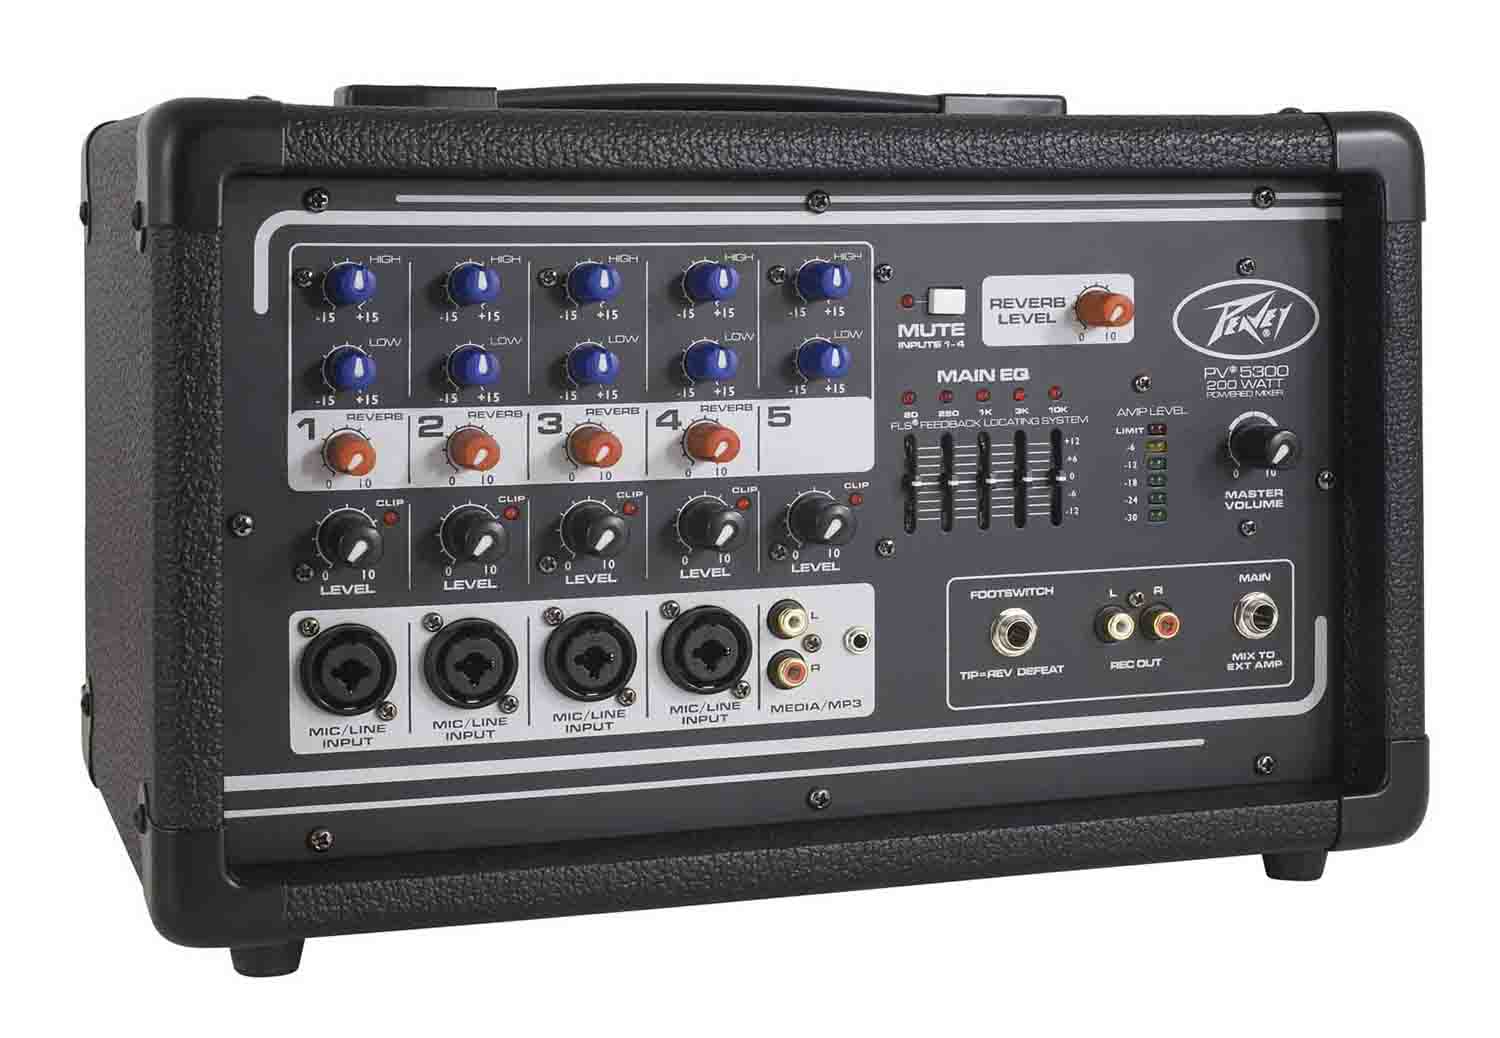 Peavey PV 5300, All in One Powered Mixer - Hollywood DJ